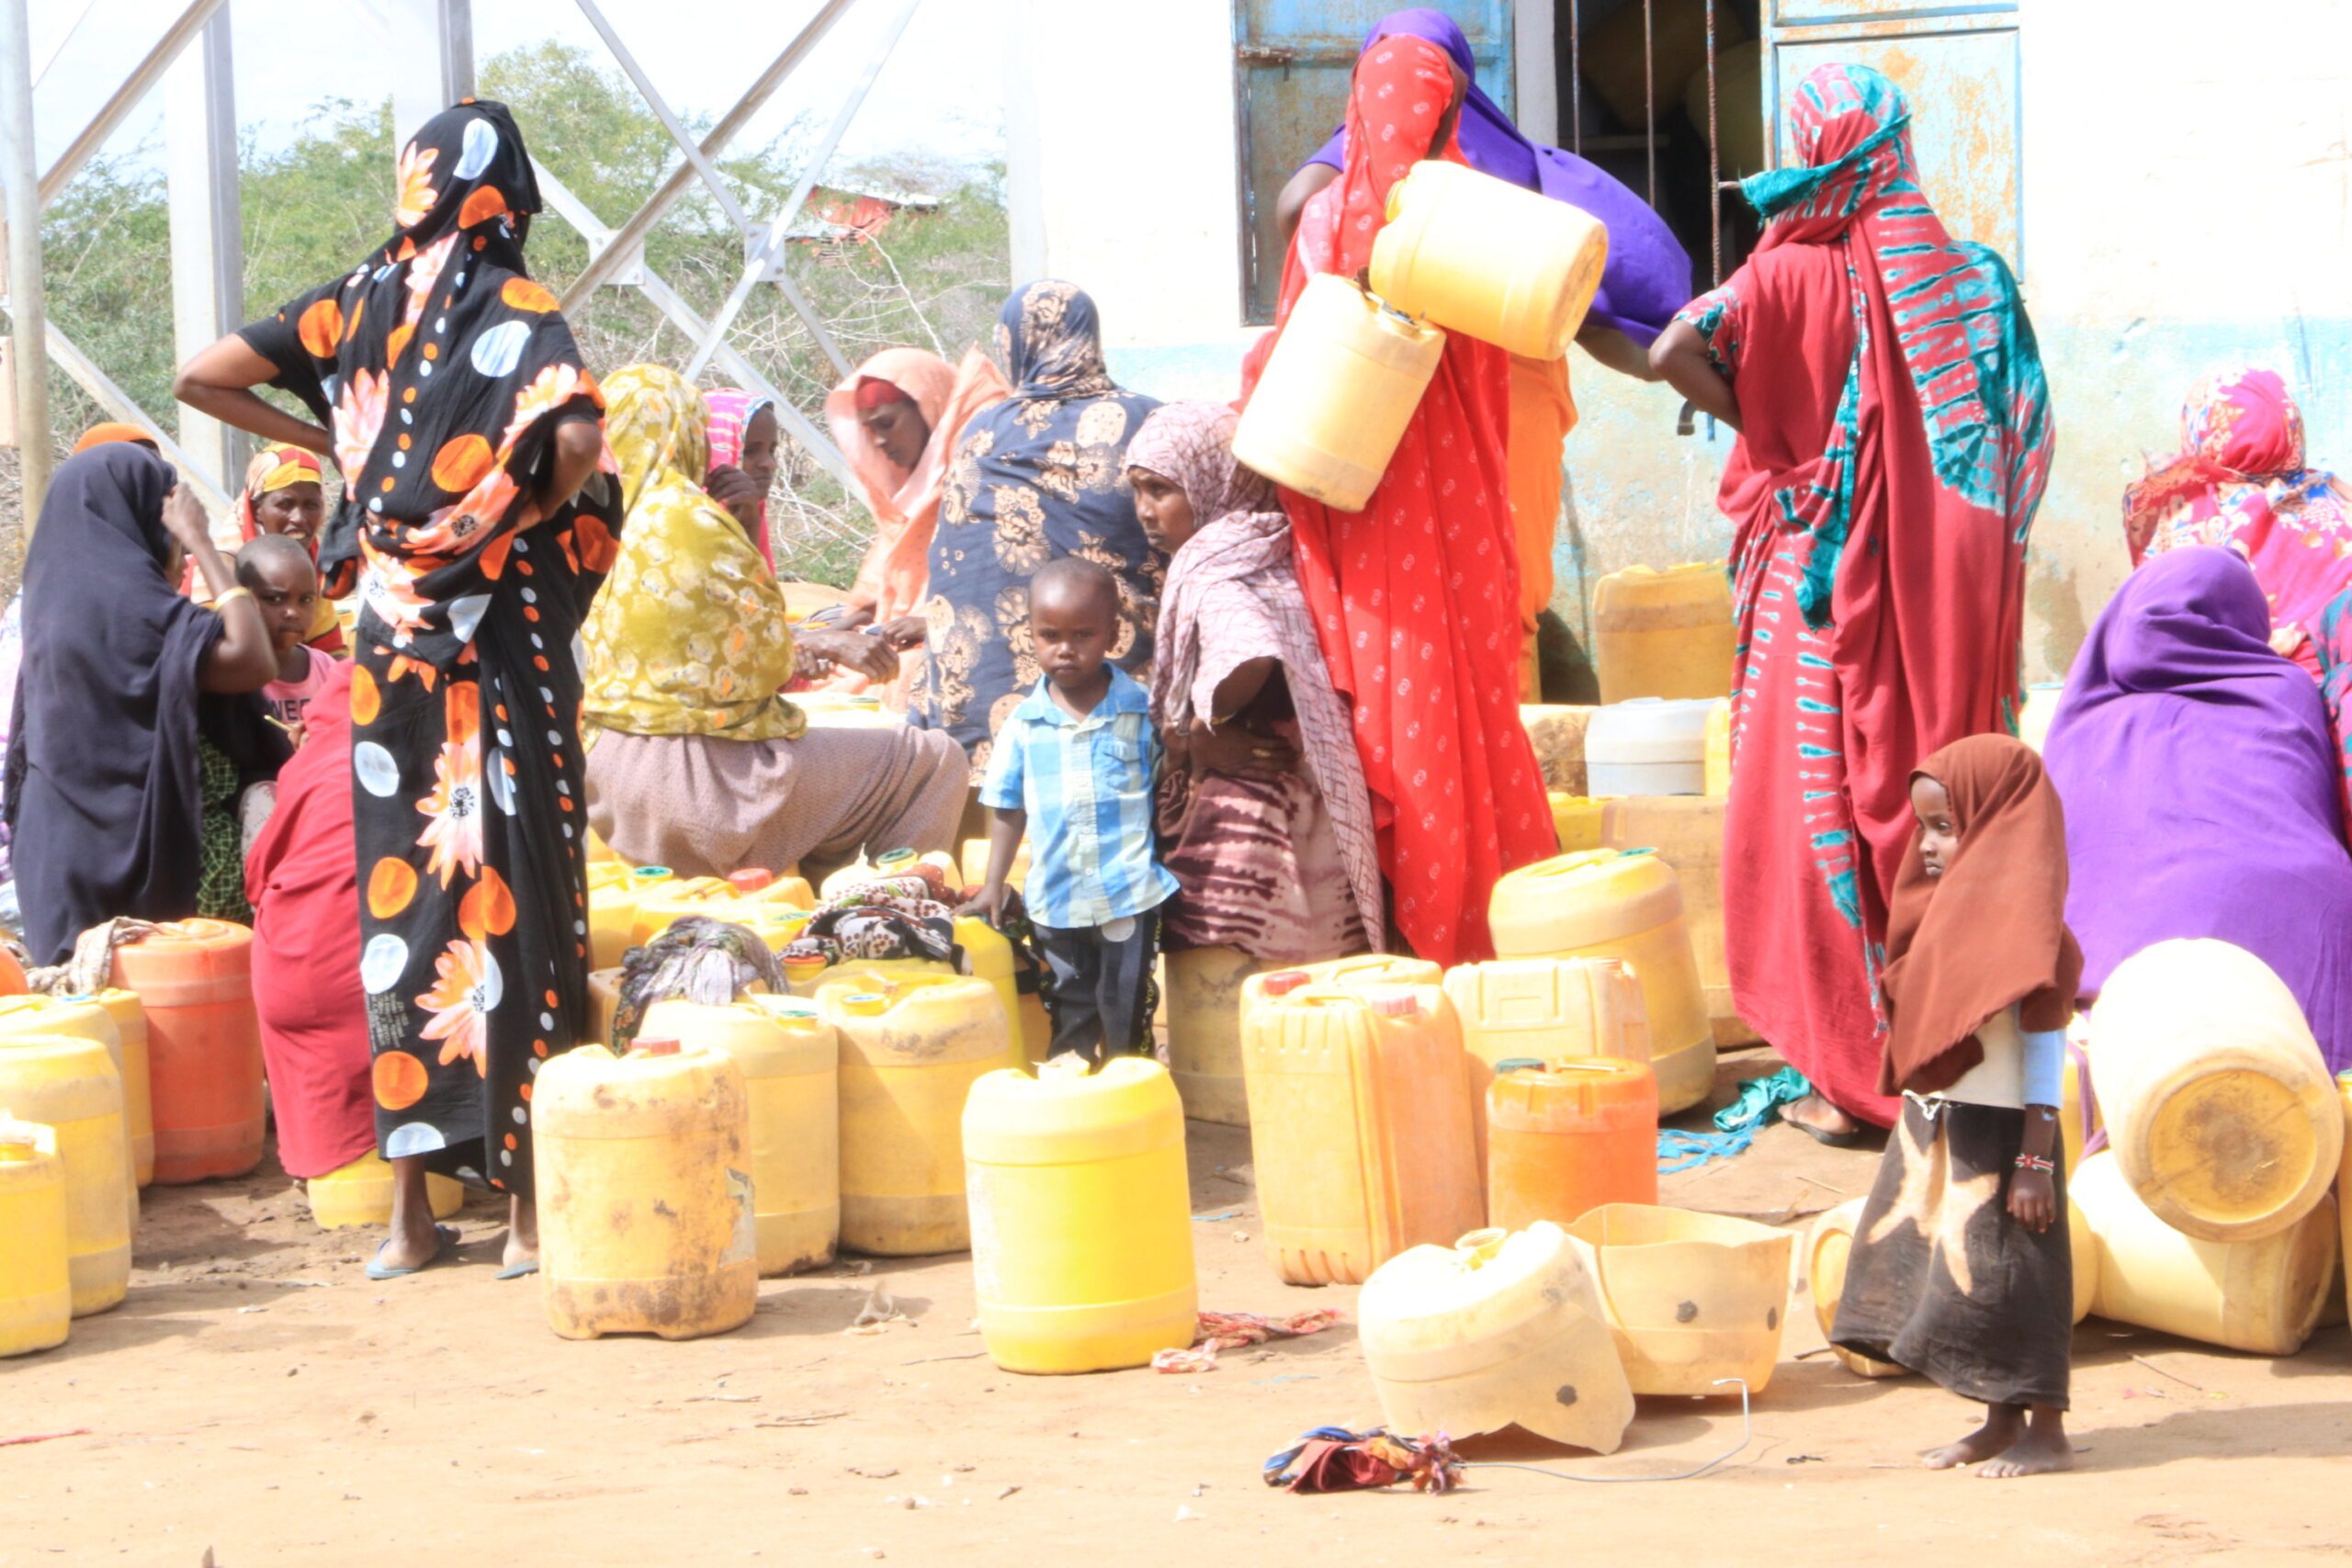 Girls and women waiting to collect water in Kenya